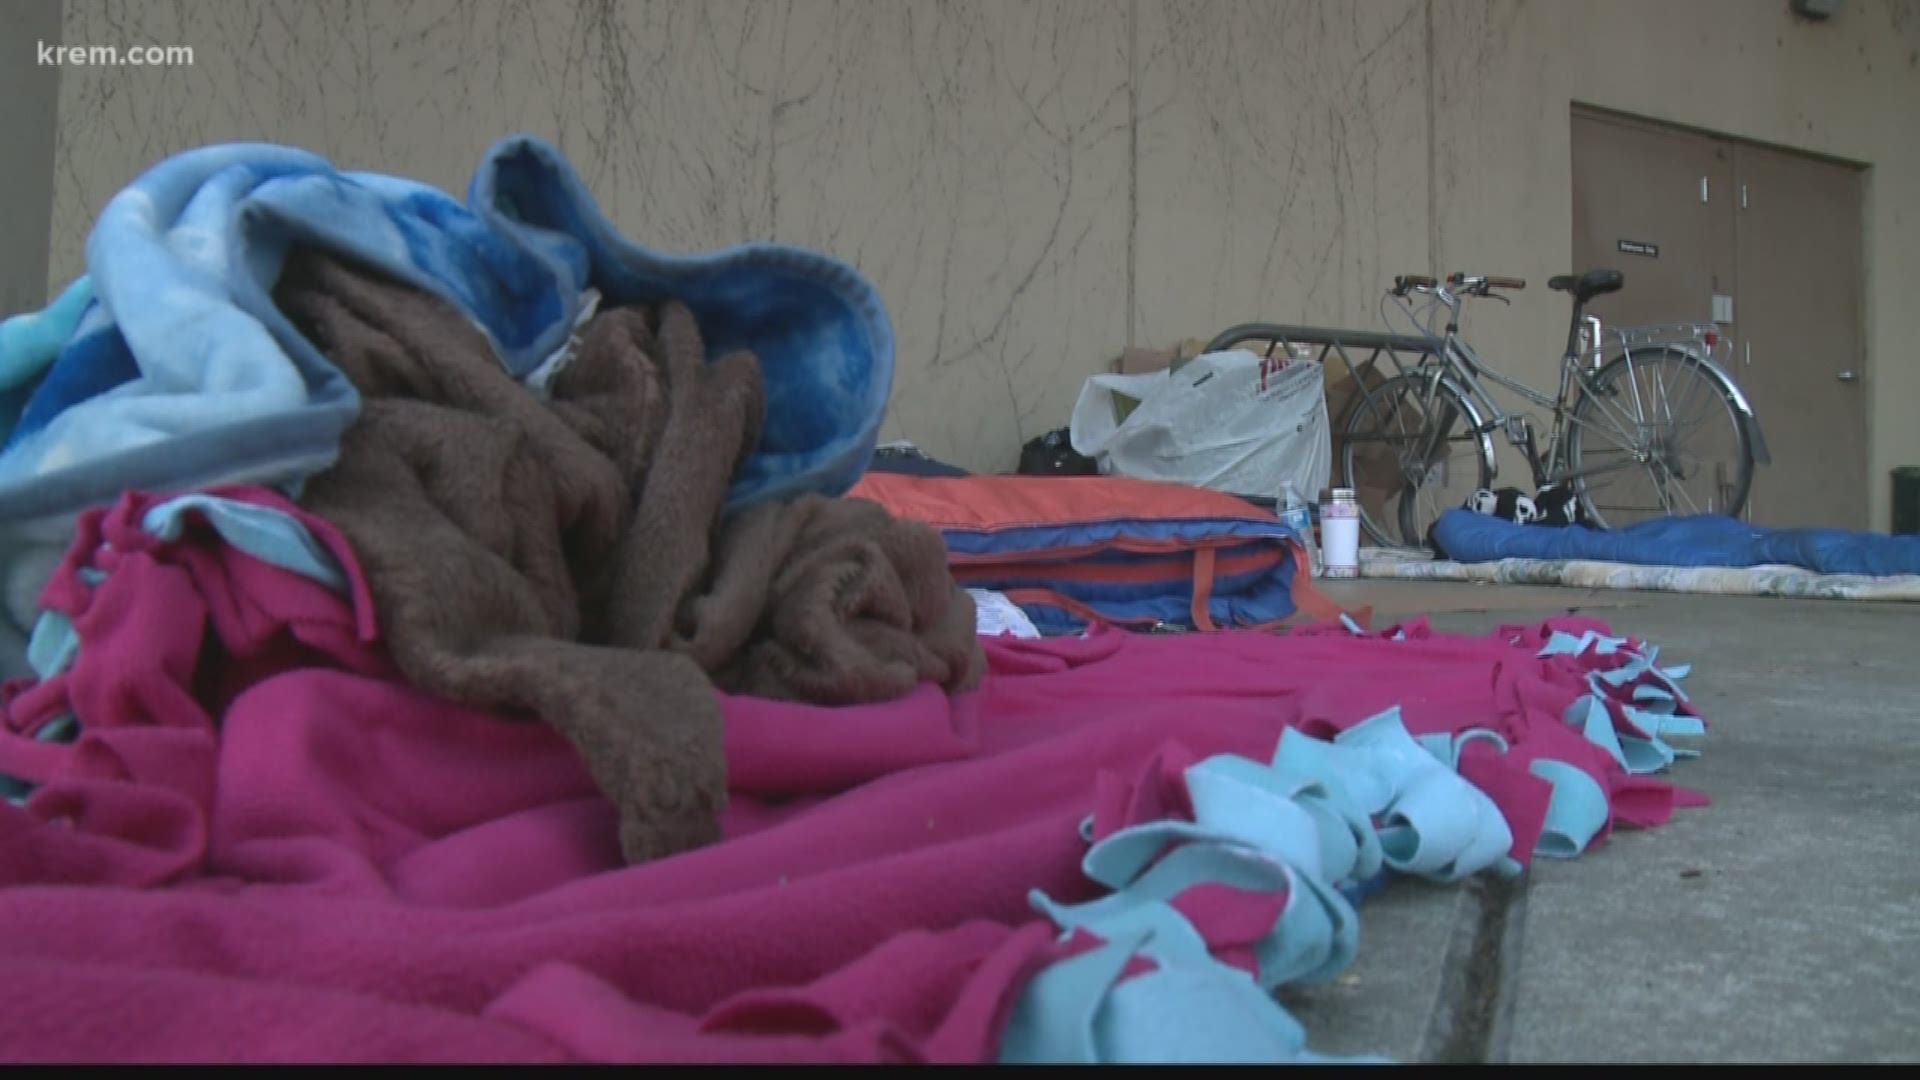 The city of Spokane is temporarily suspending the "sit and lie" ordinance. The council's action currently says the ordinance can't be enforced until 30 days after 200 more beds are made available.